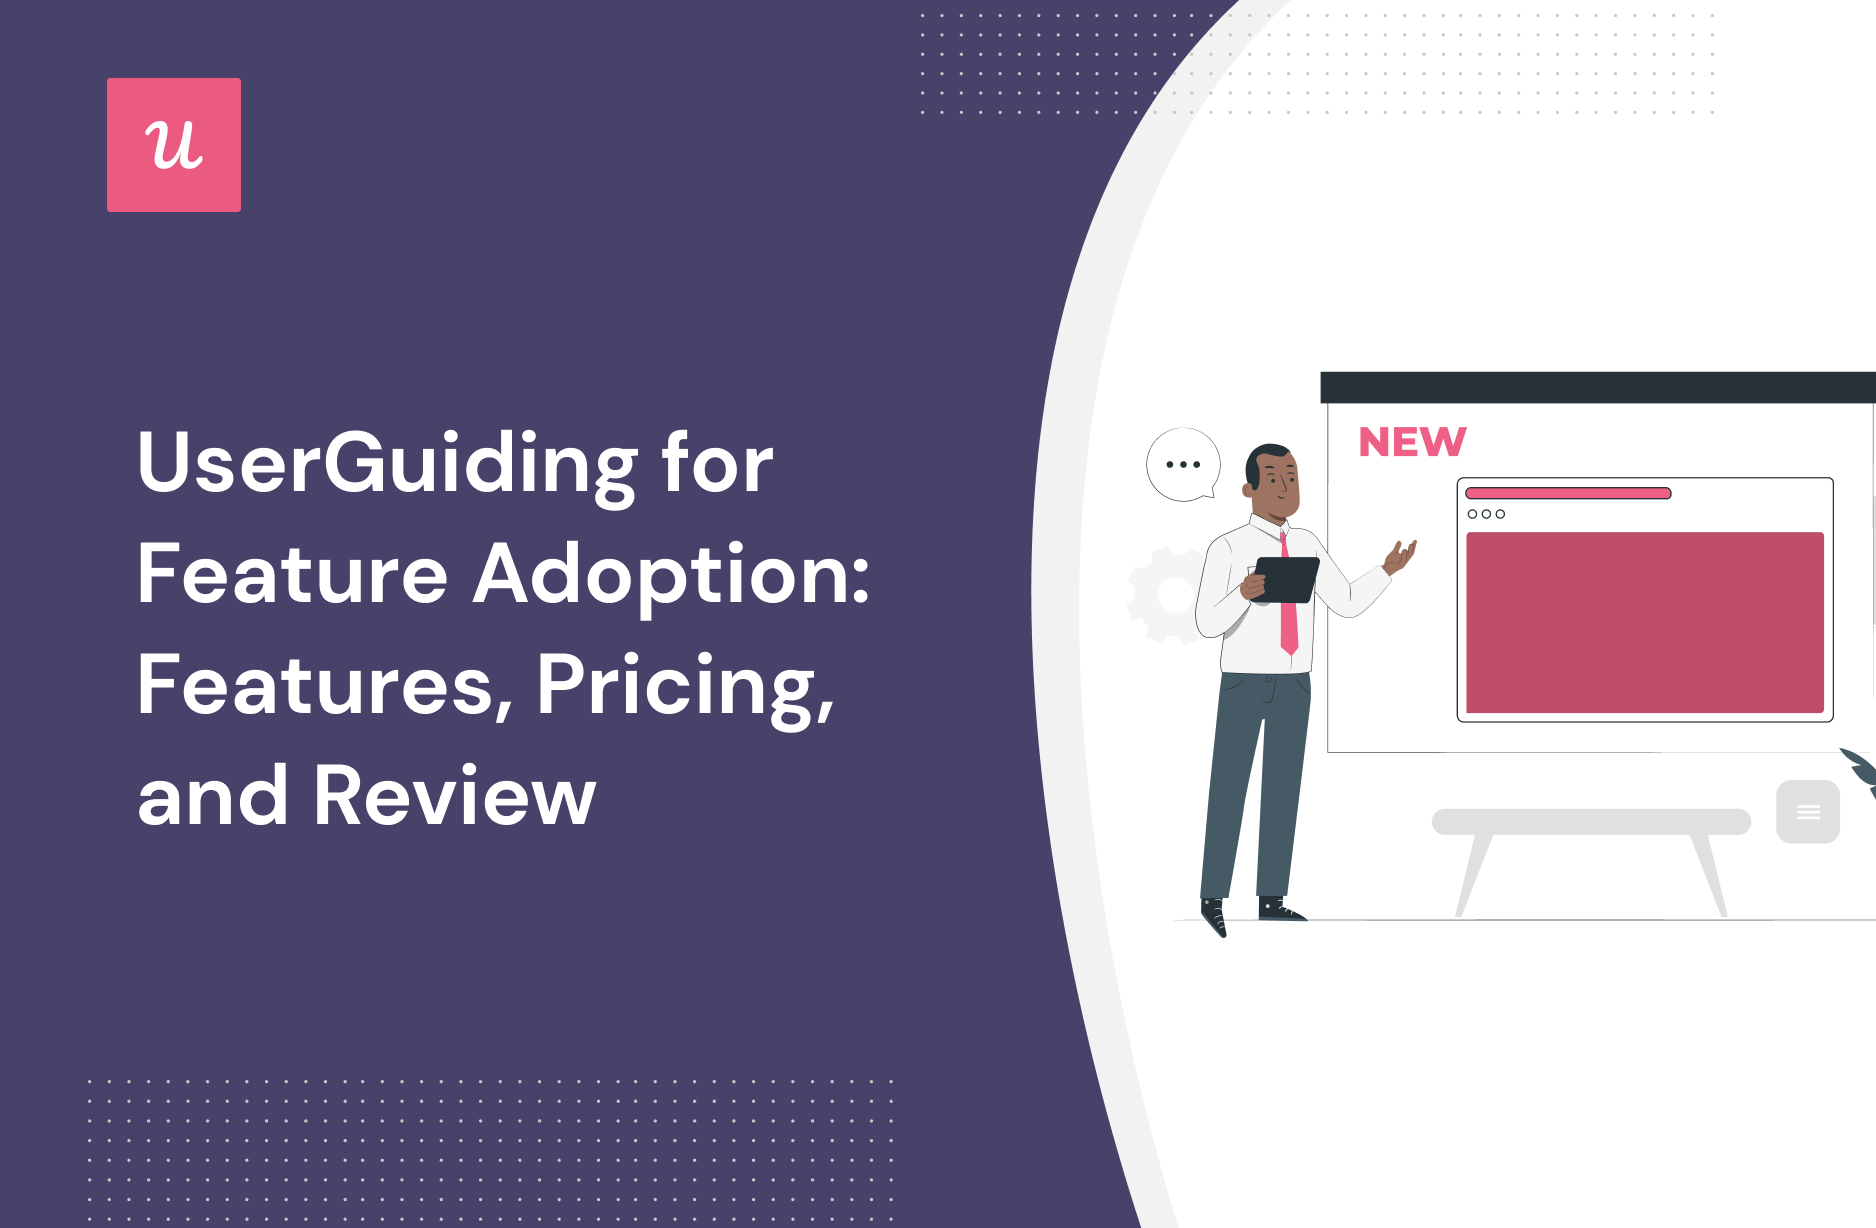 UserGuiding for Feature Adoption: Features, Pricing, and Review